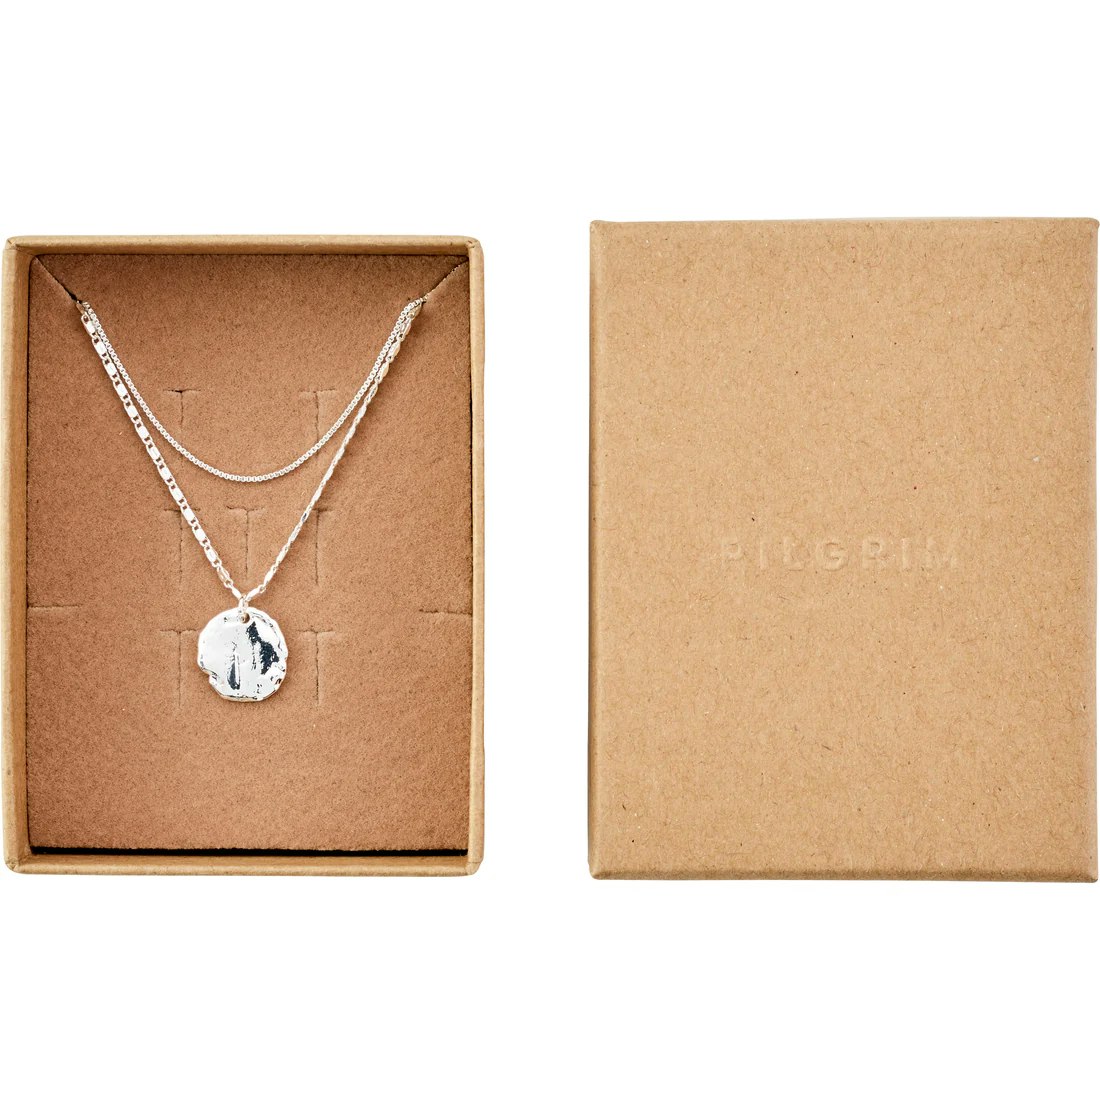 MSF Recycled Coin Necklace 2-in-1 set Silver Pilgrim